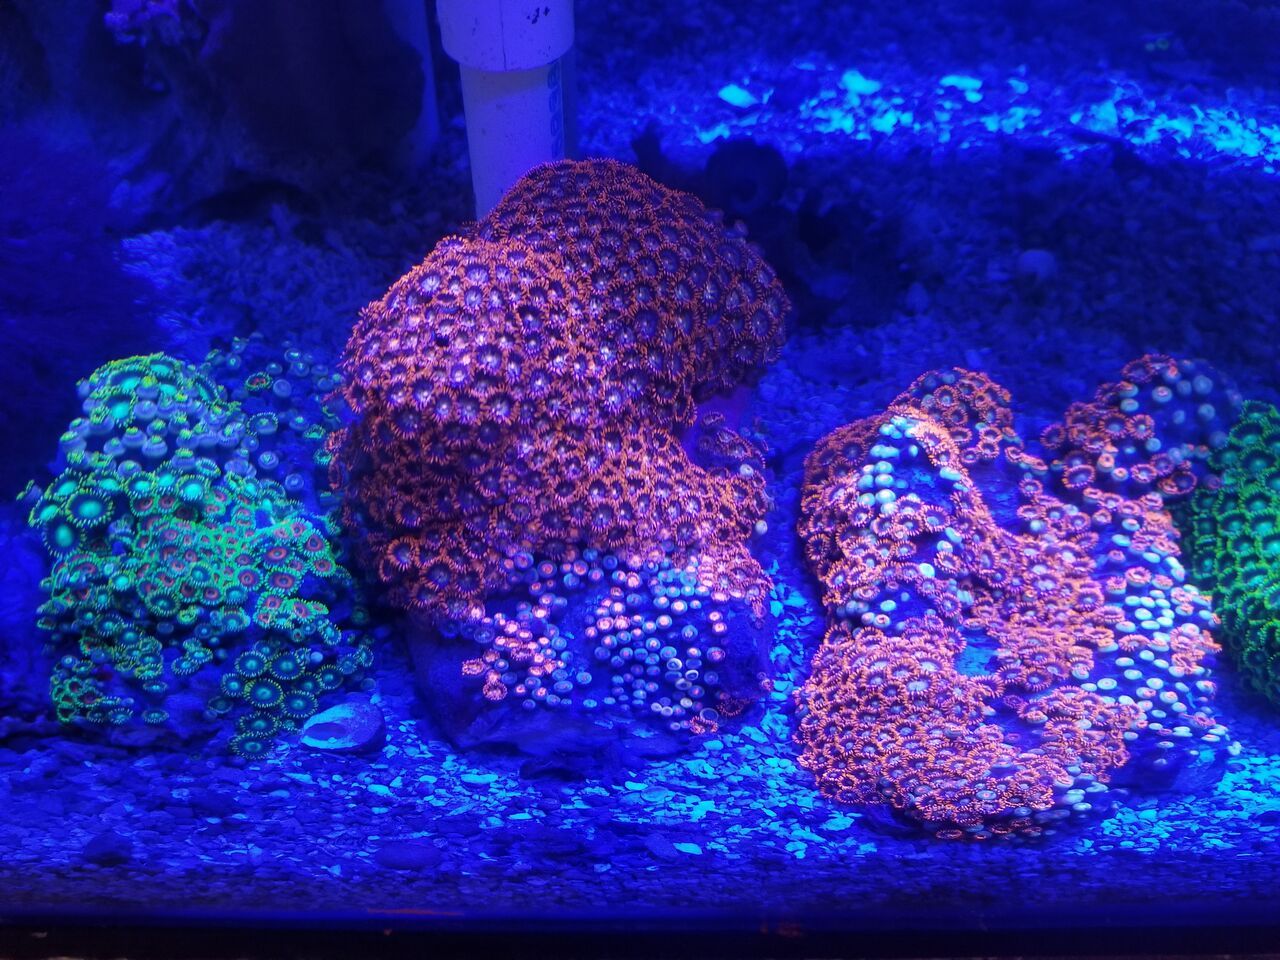 20180124 114546 preview zpsippzyeiz - Zoanthids Galore And A Whole Lot More!!! Best Deals!!